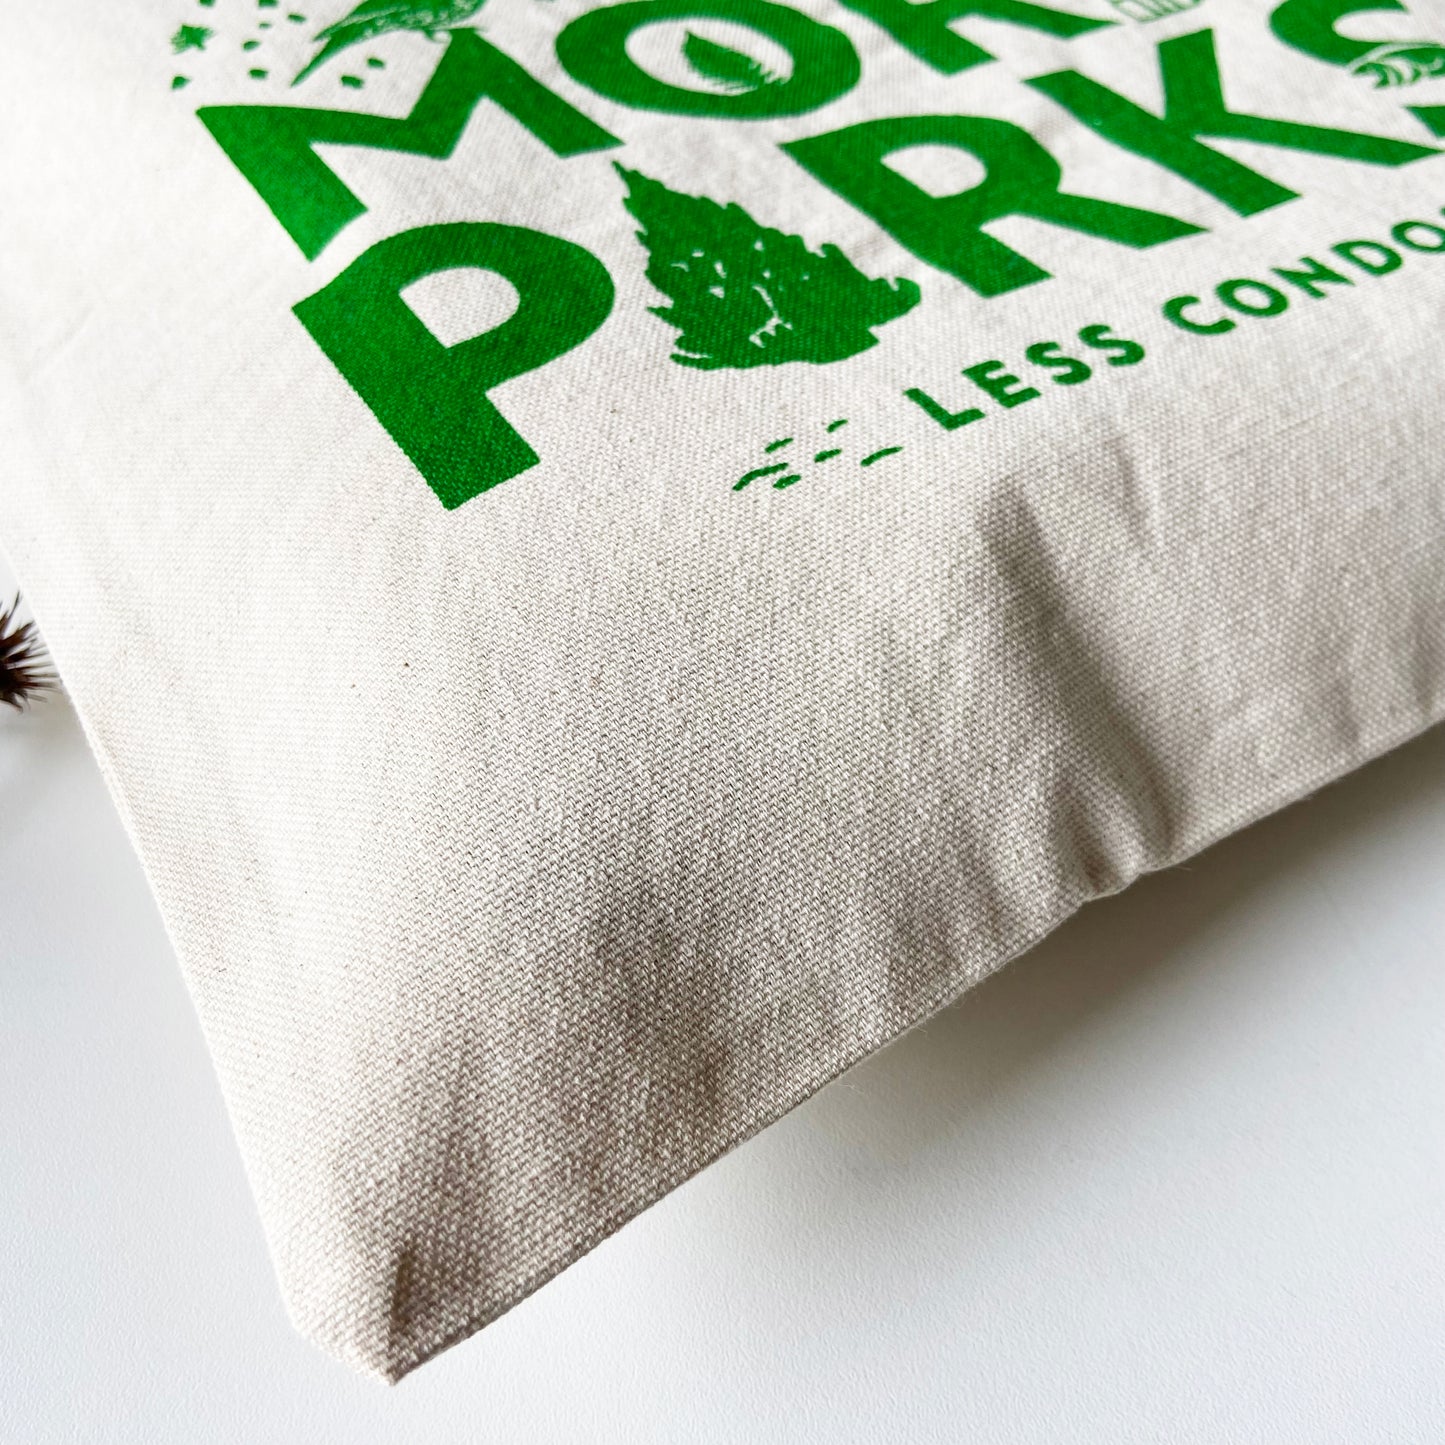 MORE PARKS Green Hand Printed Every Day Cotton Tote